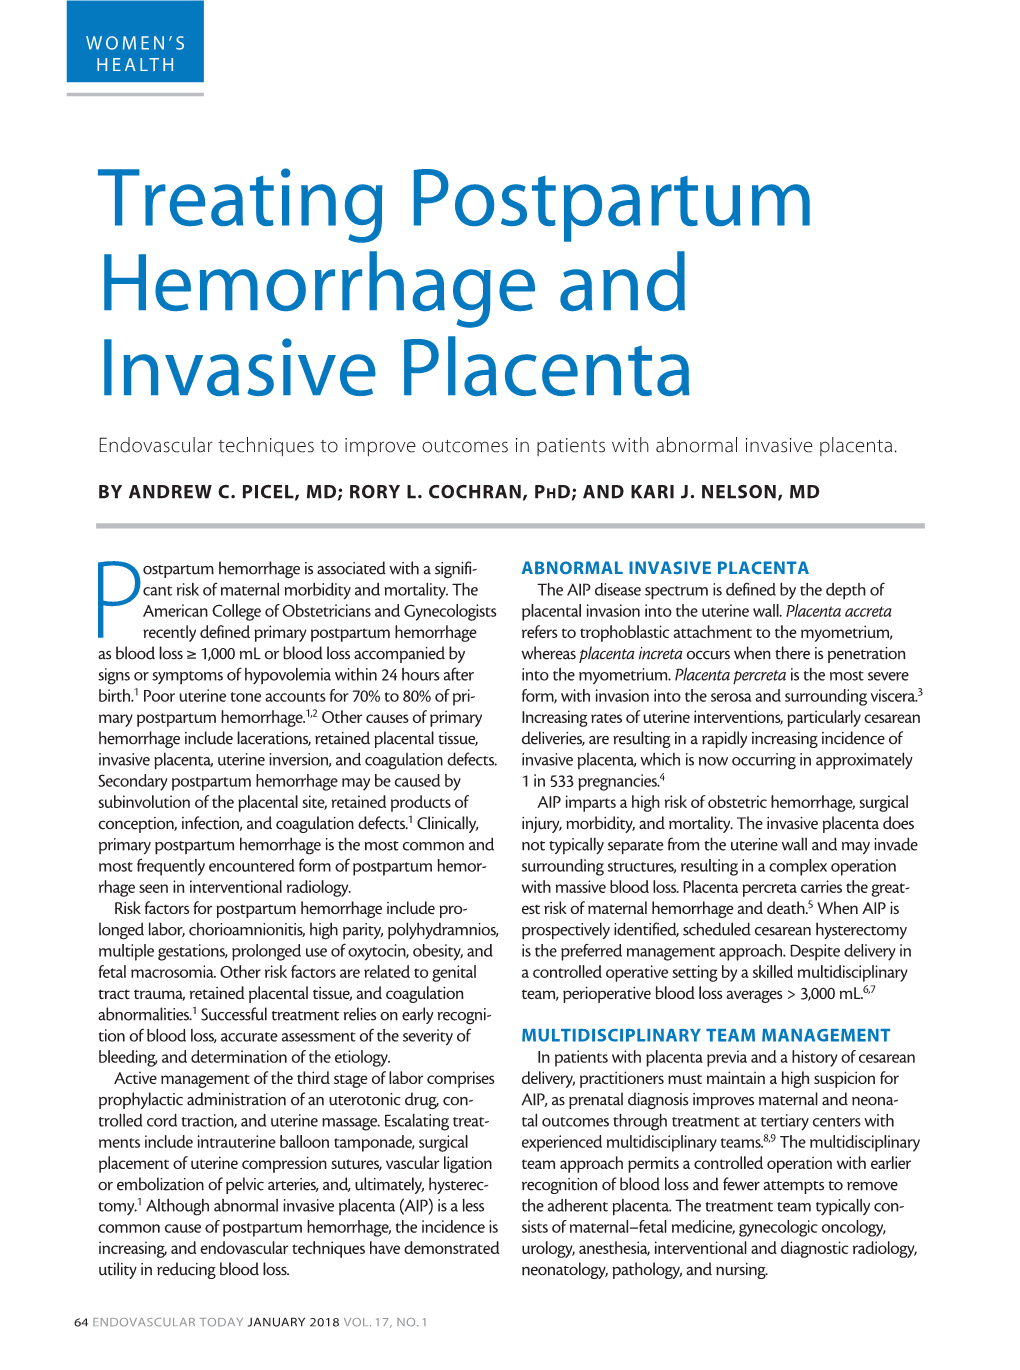 Treating Postpartum Hemorrhage and Invasive Placenta Endovascular Techniques to Improve Outcomes in Patients with Abnormal Invasive Placenta